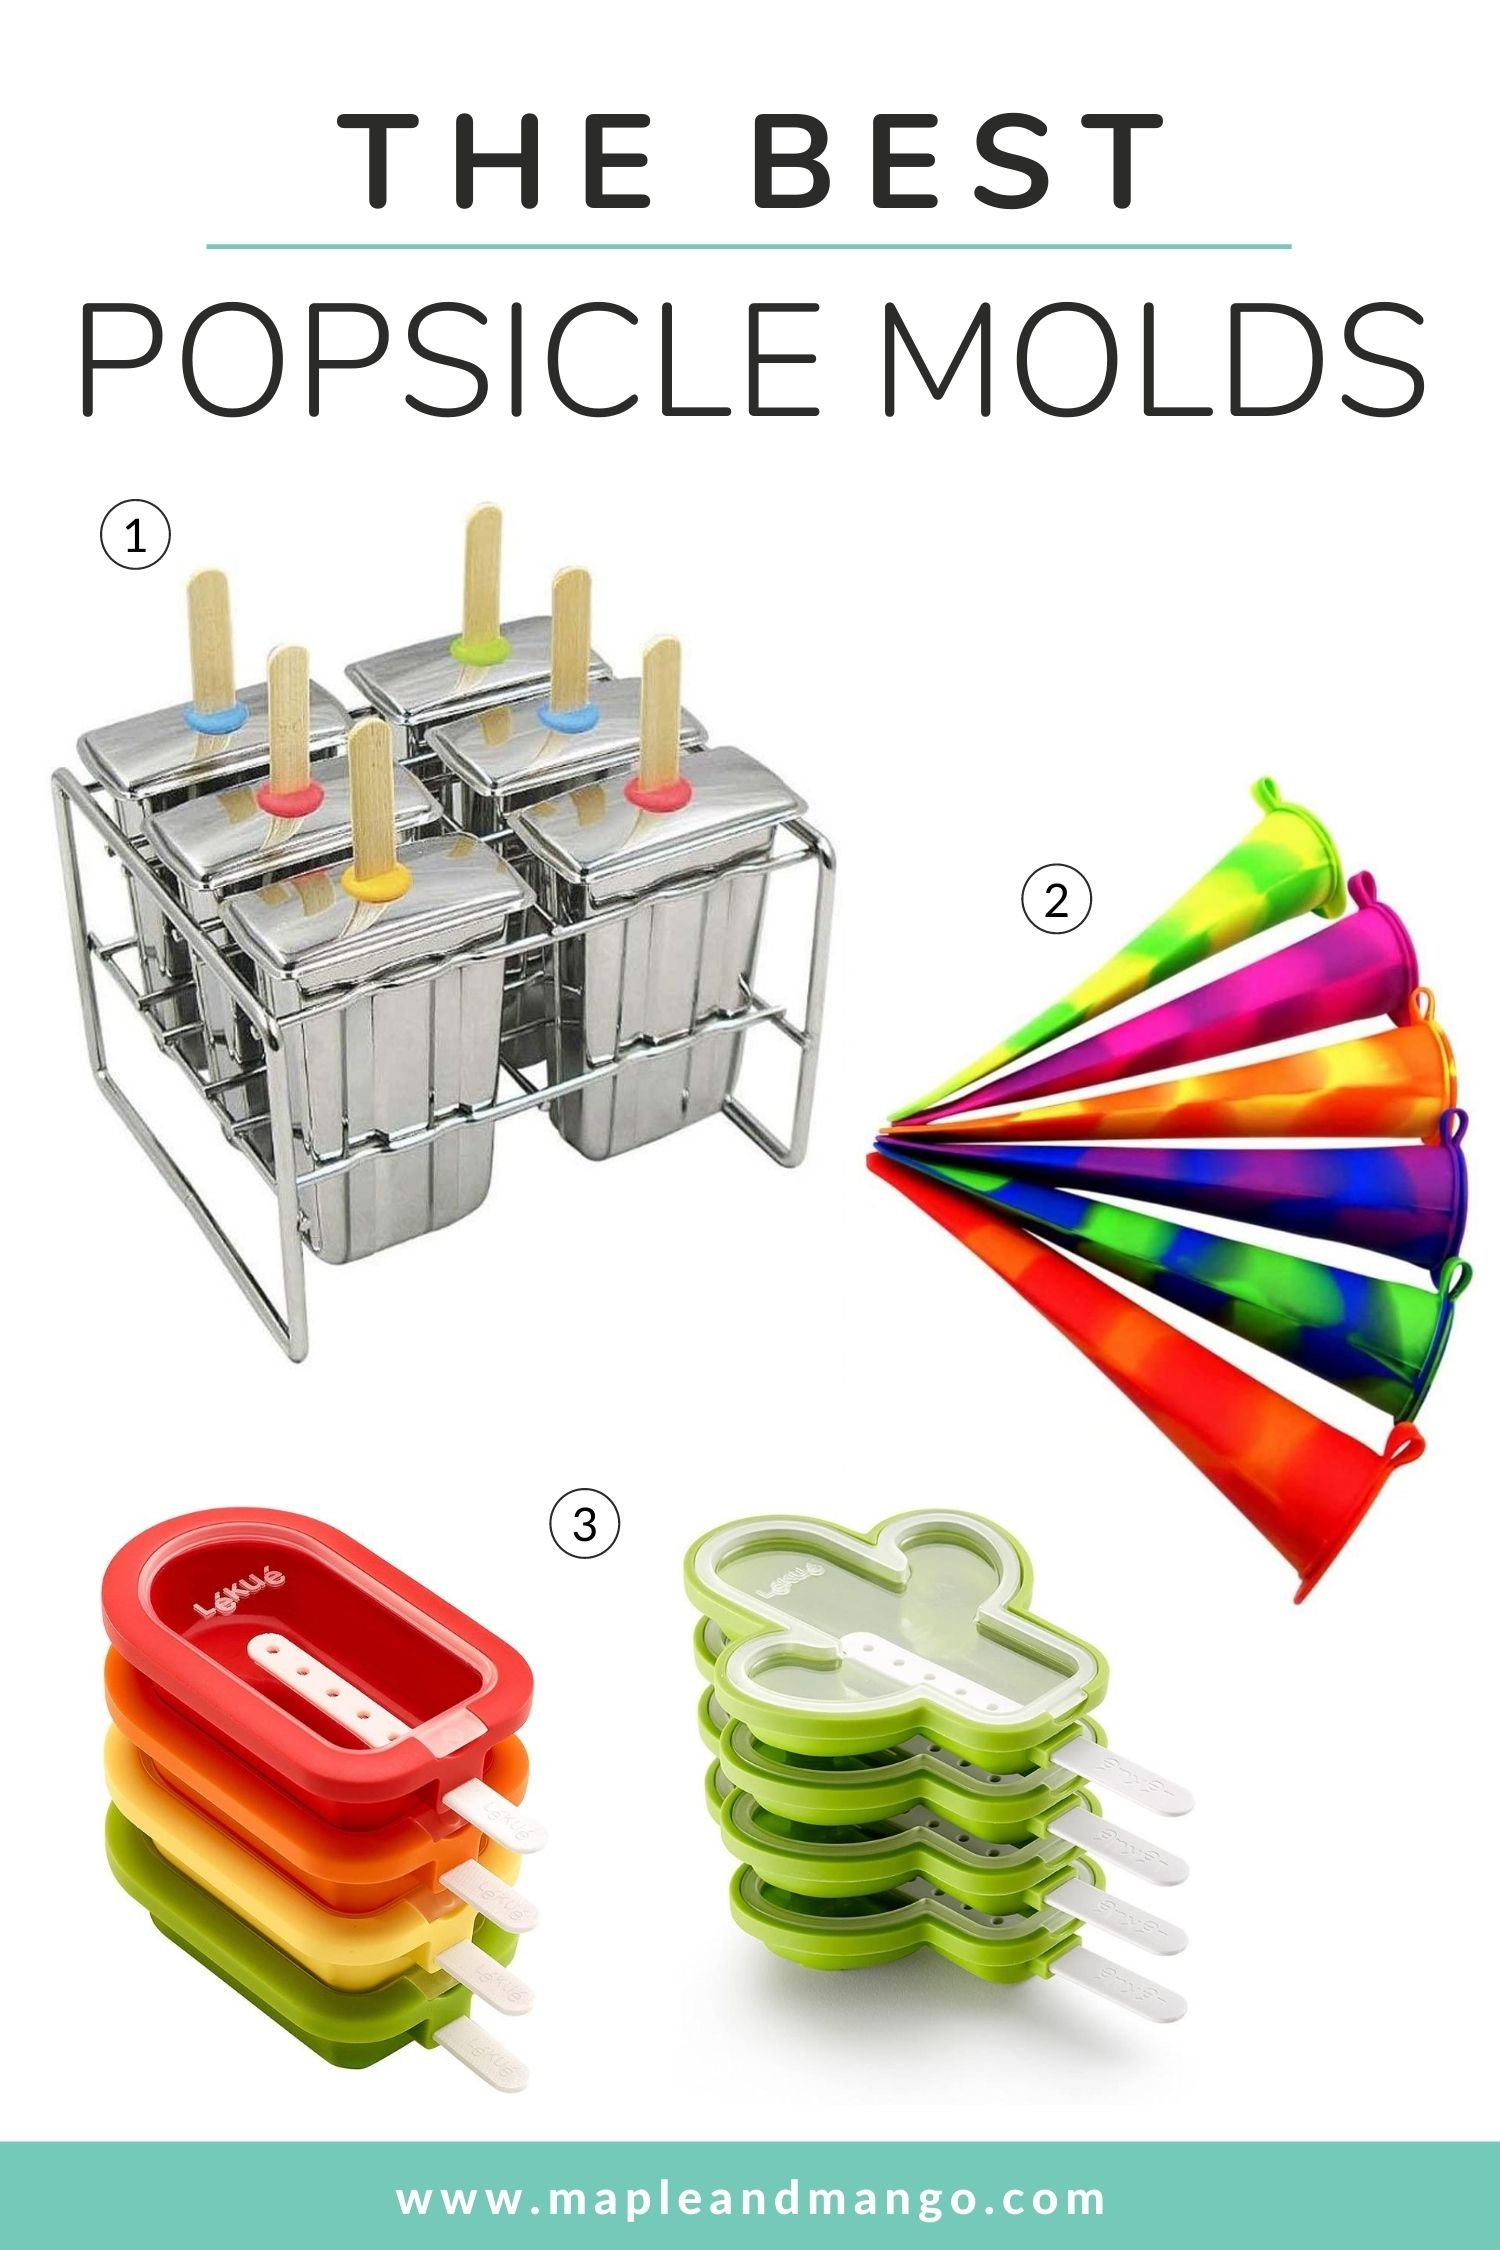 Graphic containing images of four different popsicle molds with text overlay "The Best Popsicle Molds"